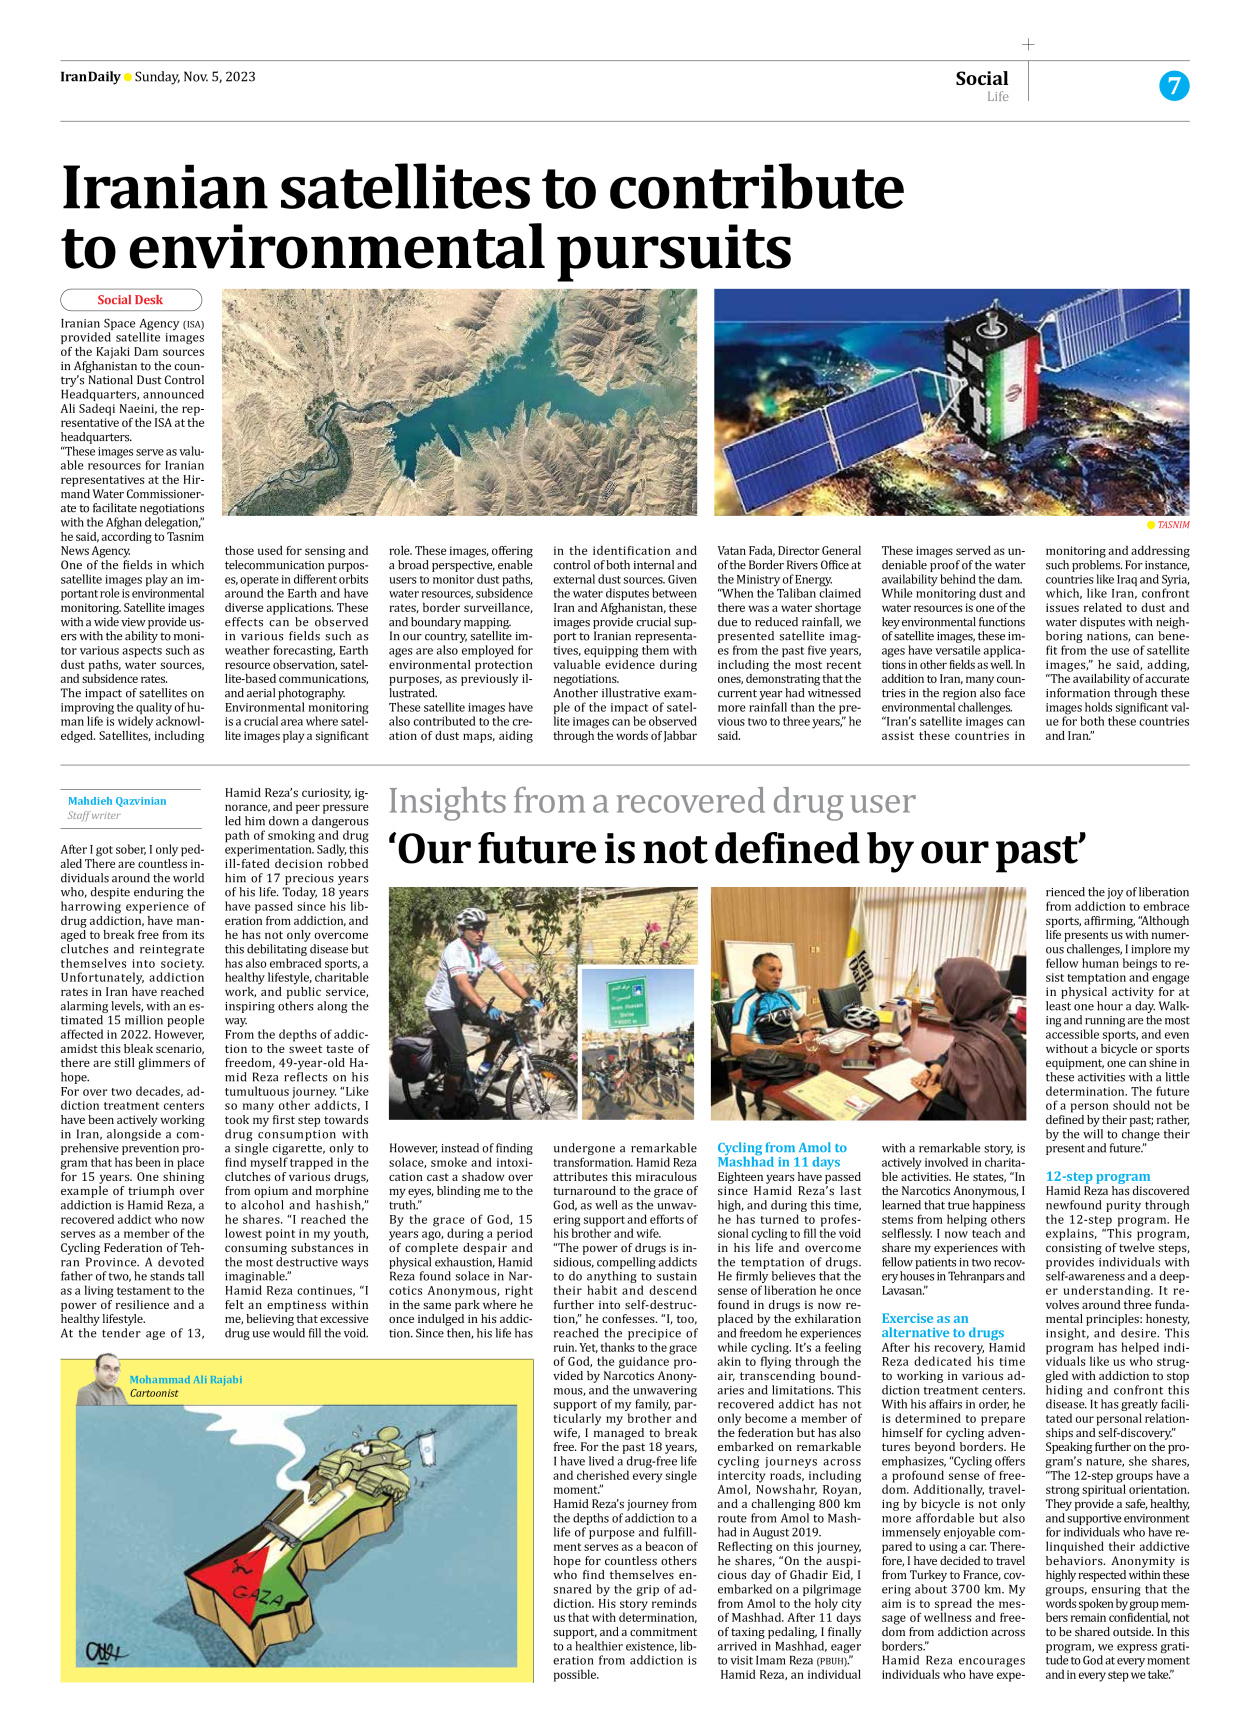 Iran Daily - Number Seven Thousand Four Hundred and Twenty Six - 05 November 2023 - Page 7